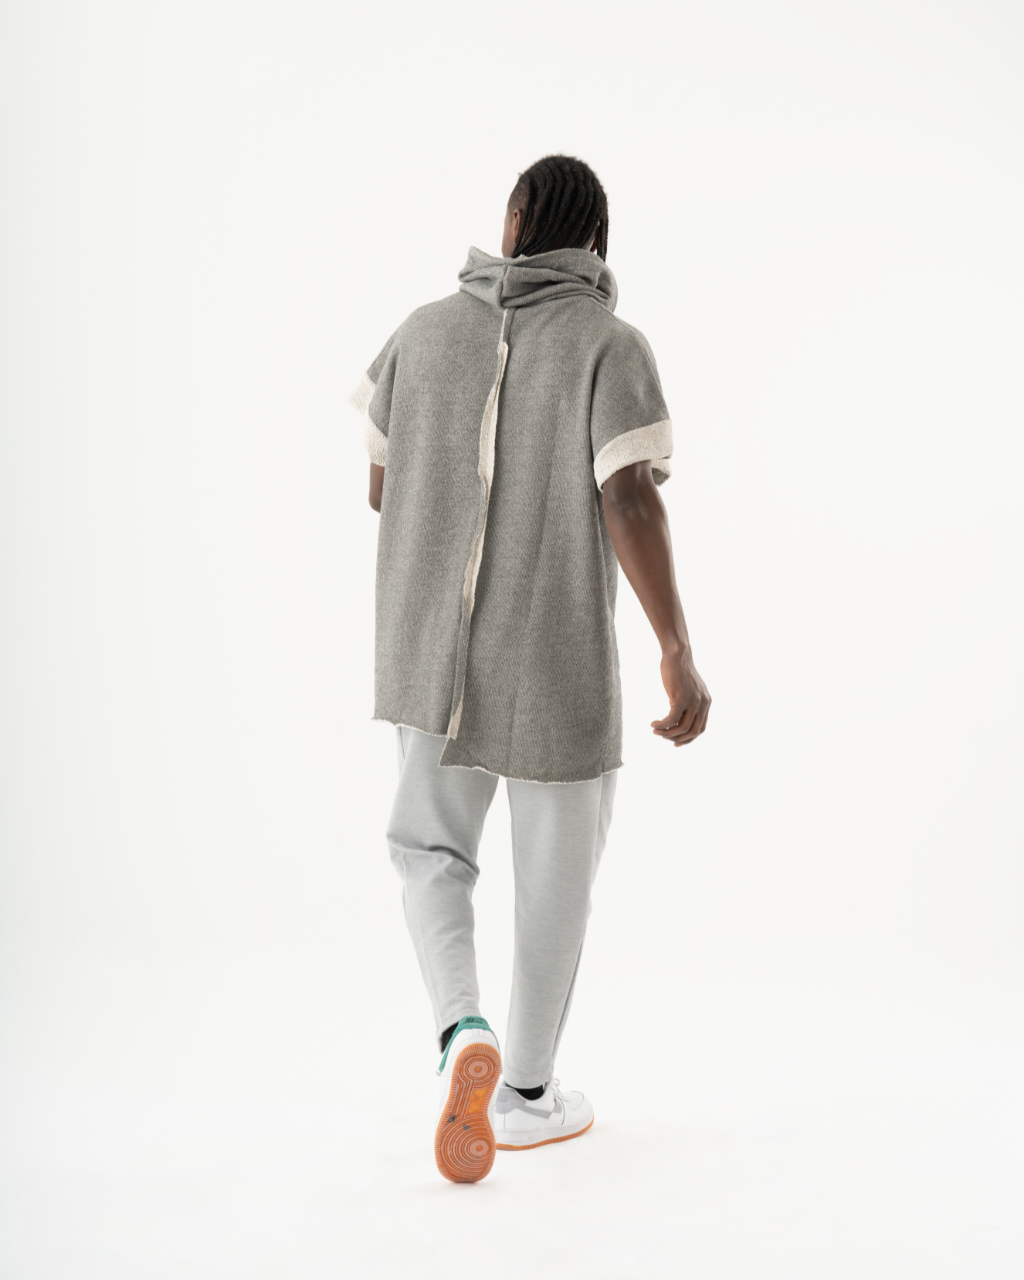 A man wearing a HAILMARY HOODIE grey hoodie and sneakers walking down a white background with a comfortable fit.